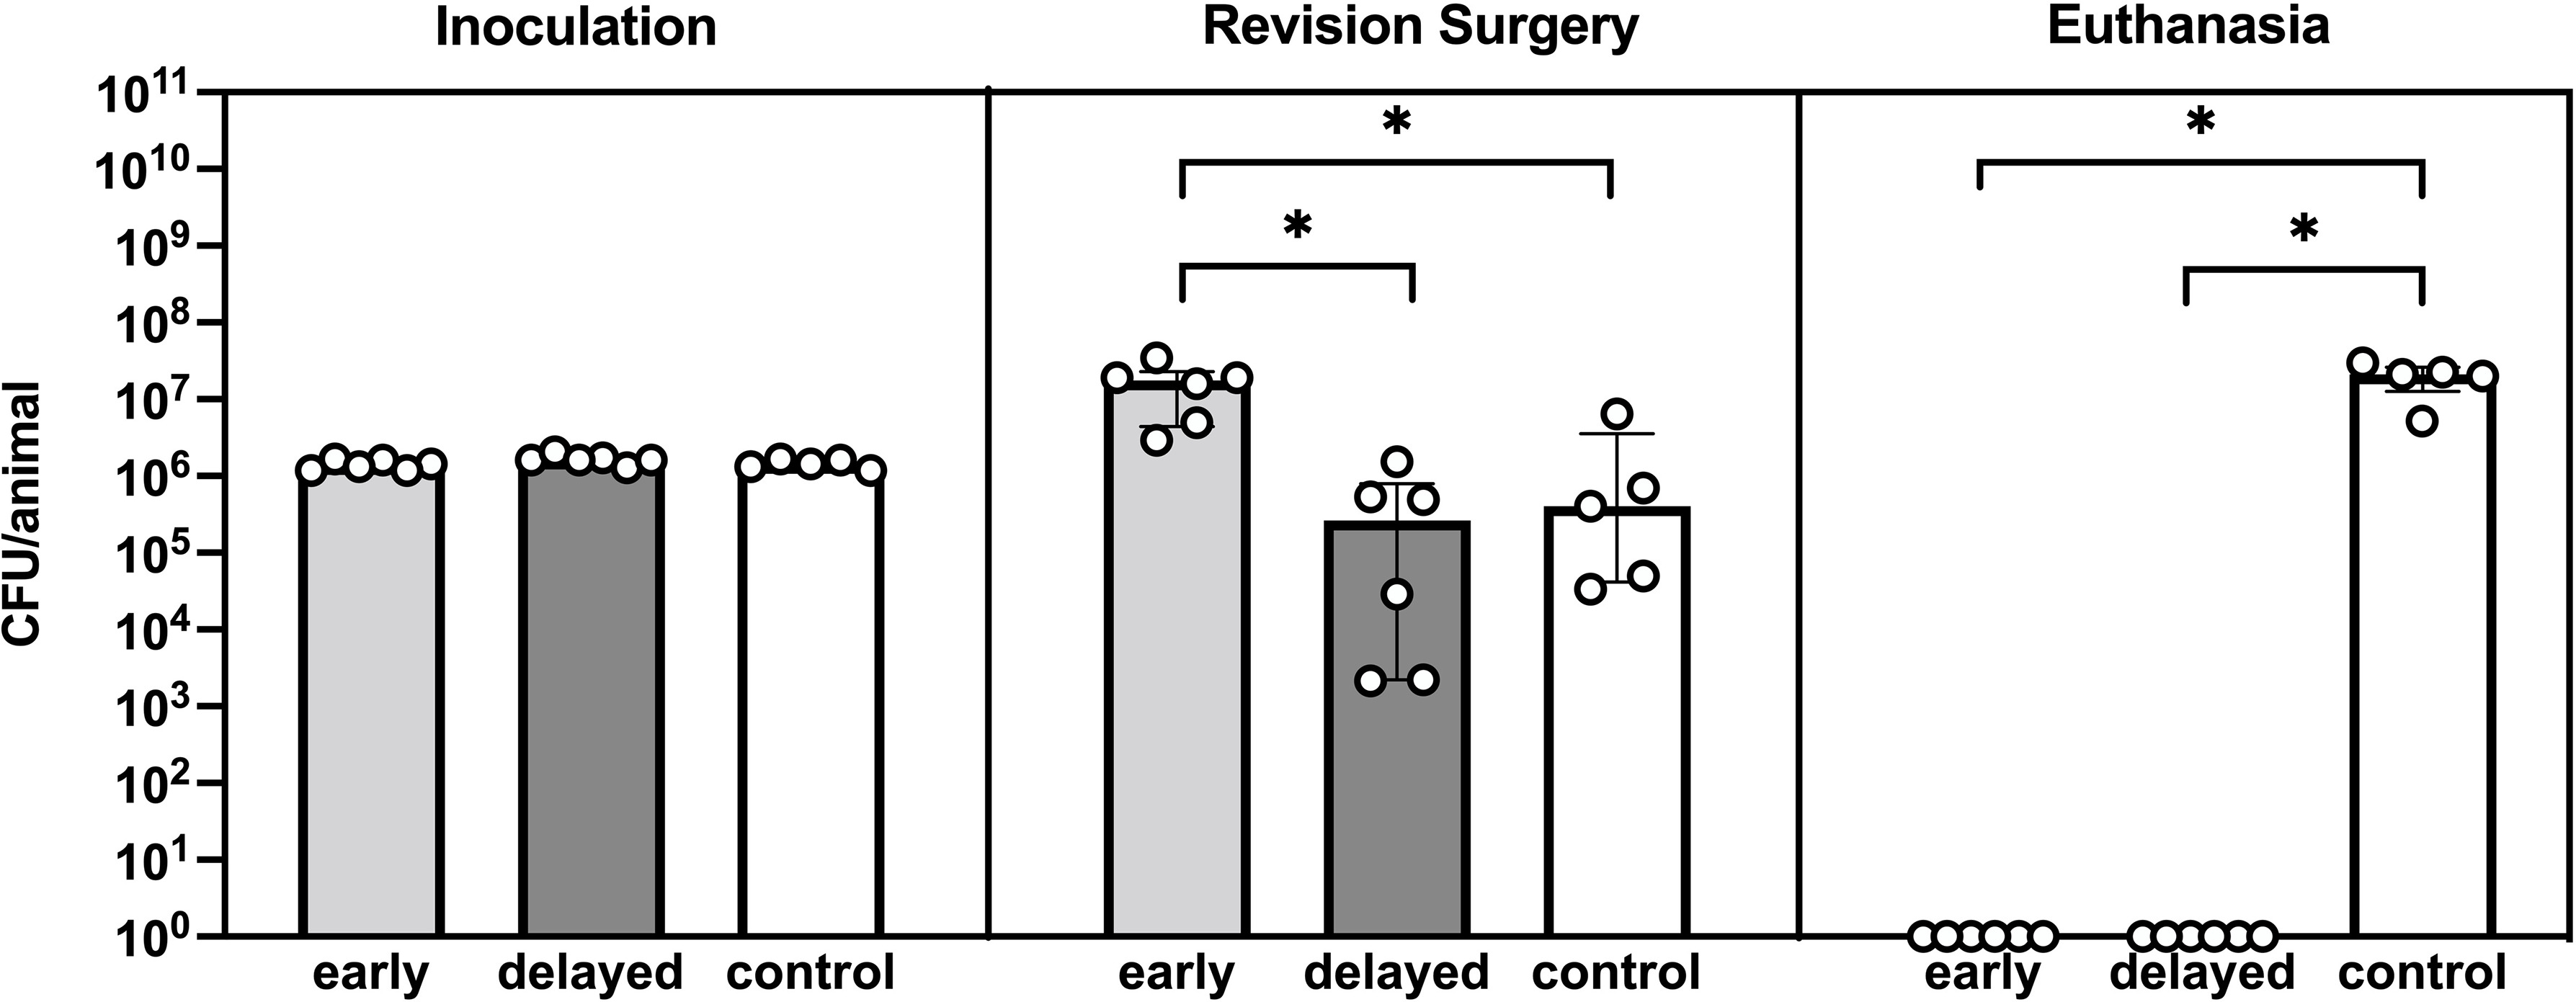 Fig. 2 
            Quantitative microbiology of the three study groups: Staphylococcus aureus colony-forming unit (CFU) count at inoculation, revision surgery, and euthanasia. *p < 0.05, Mann-Whitney U test. Bars indicate the median, and error bars indicate the interquartile range. *p < 0.05, Mann-Whitney U test.
          